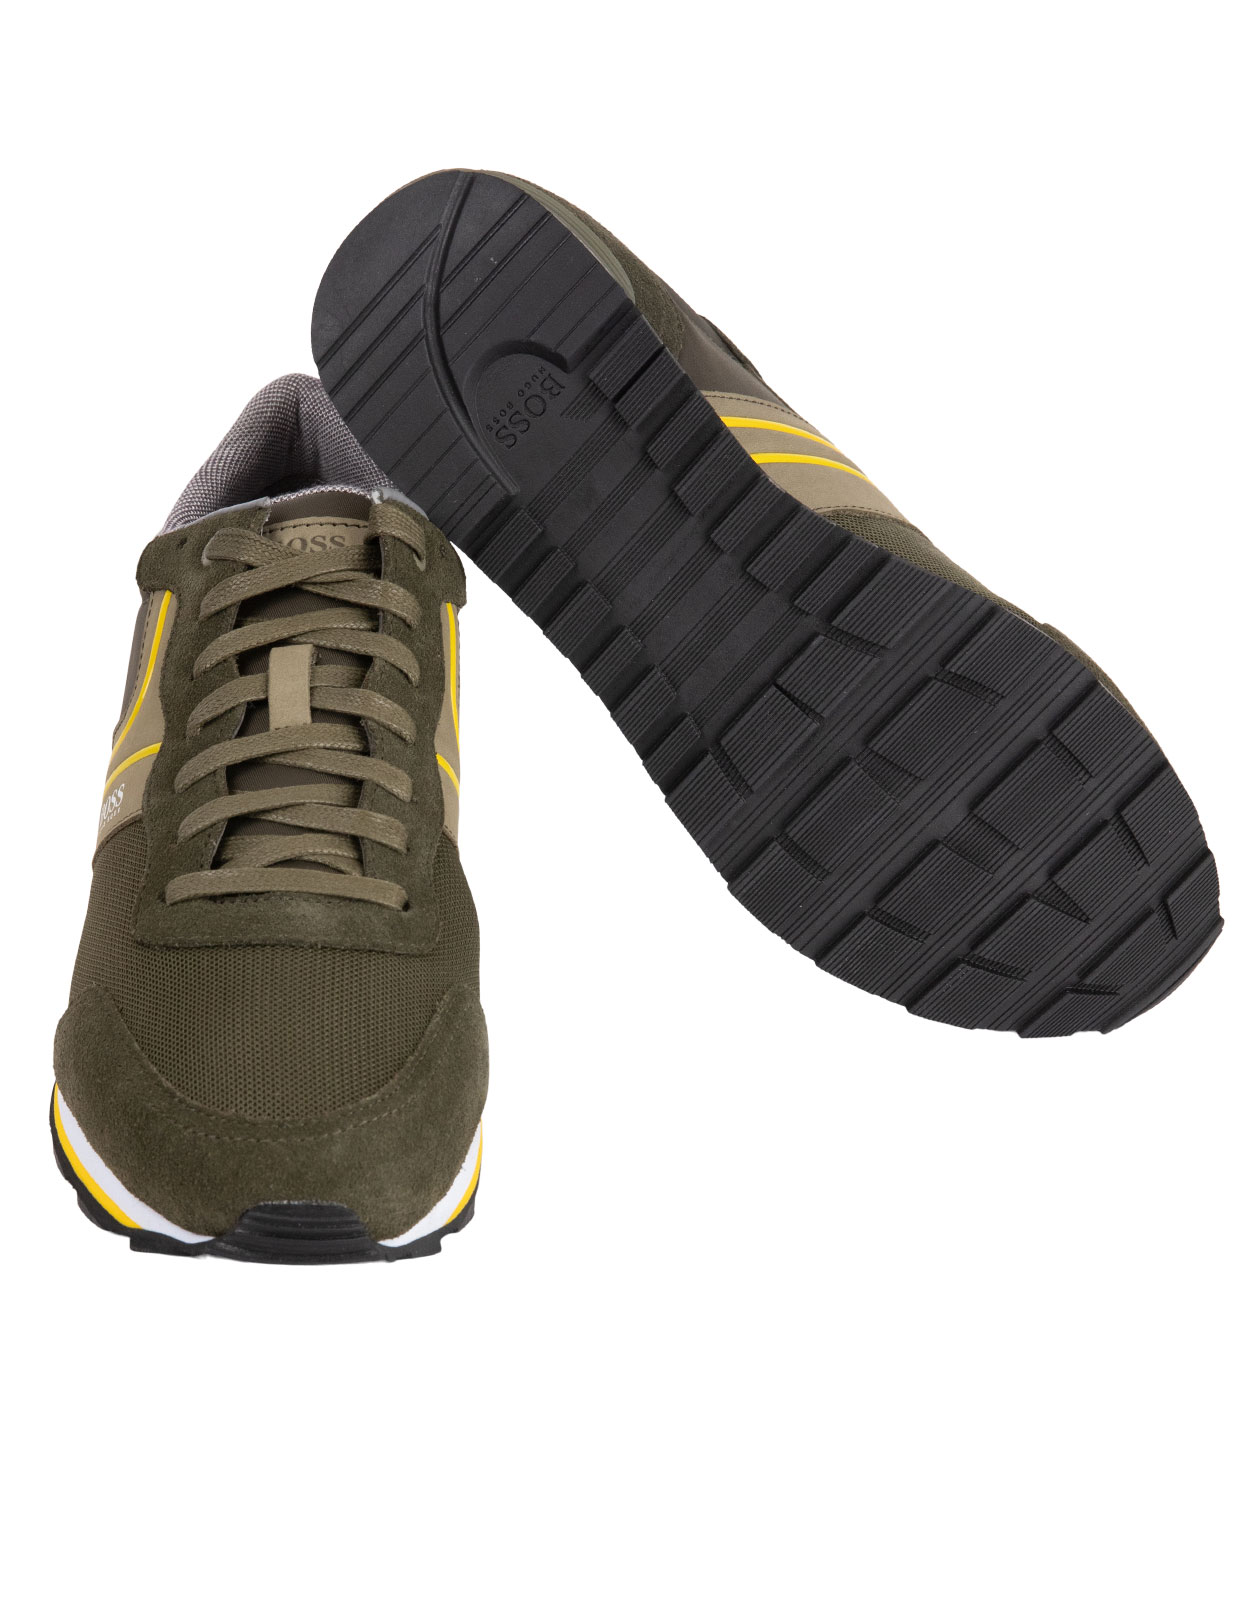 Running Style Trainers Suede Mesh Open Green Stl 43